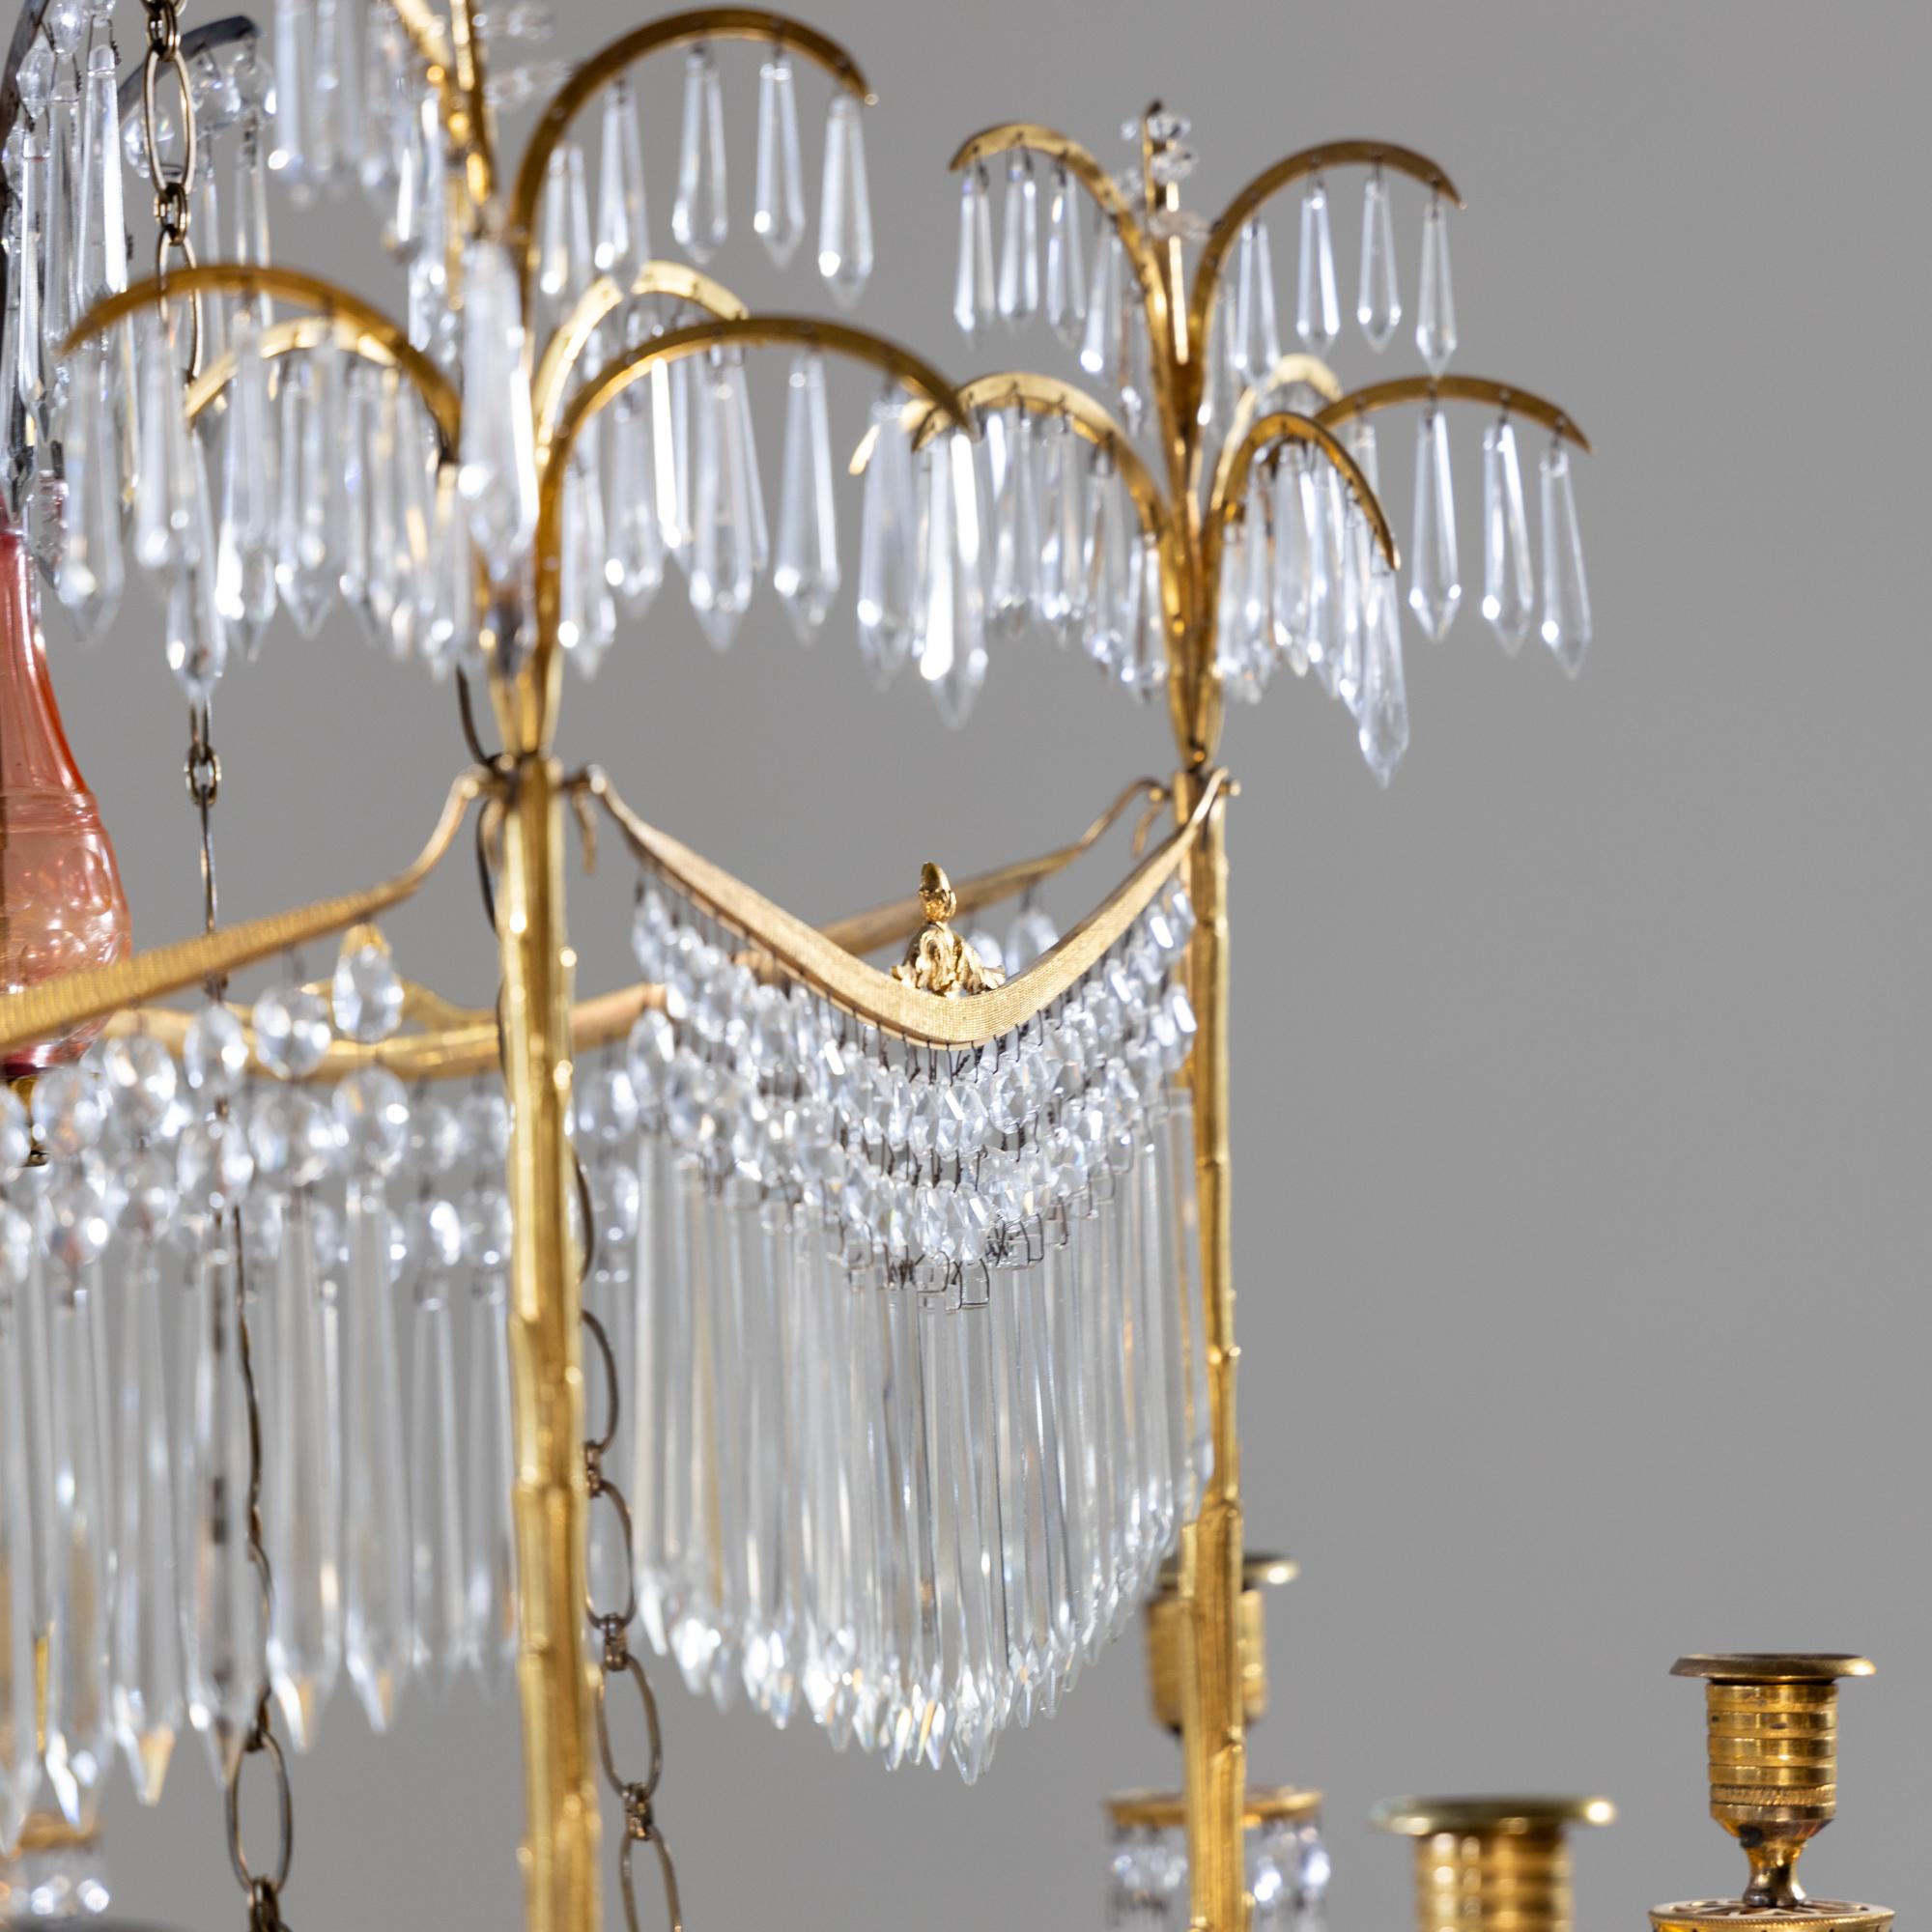 Chandelier with Palm Trees, Werner & Mieth, Berlin c. 1800-1810 For Sale 11